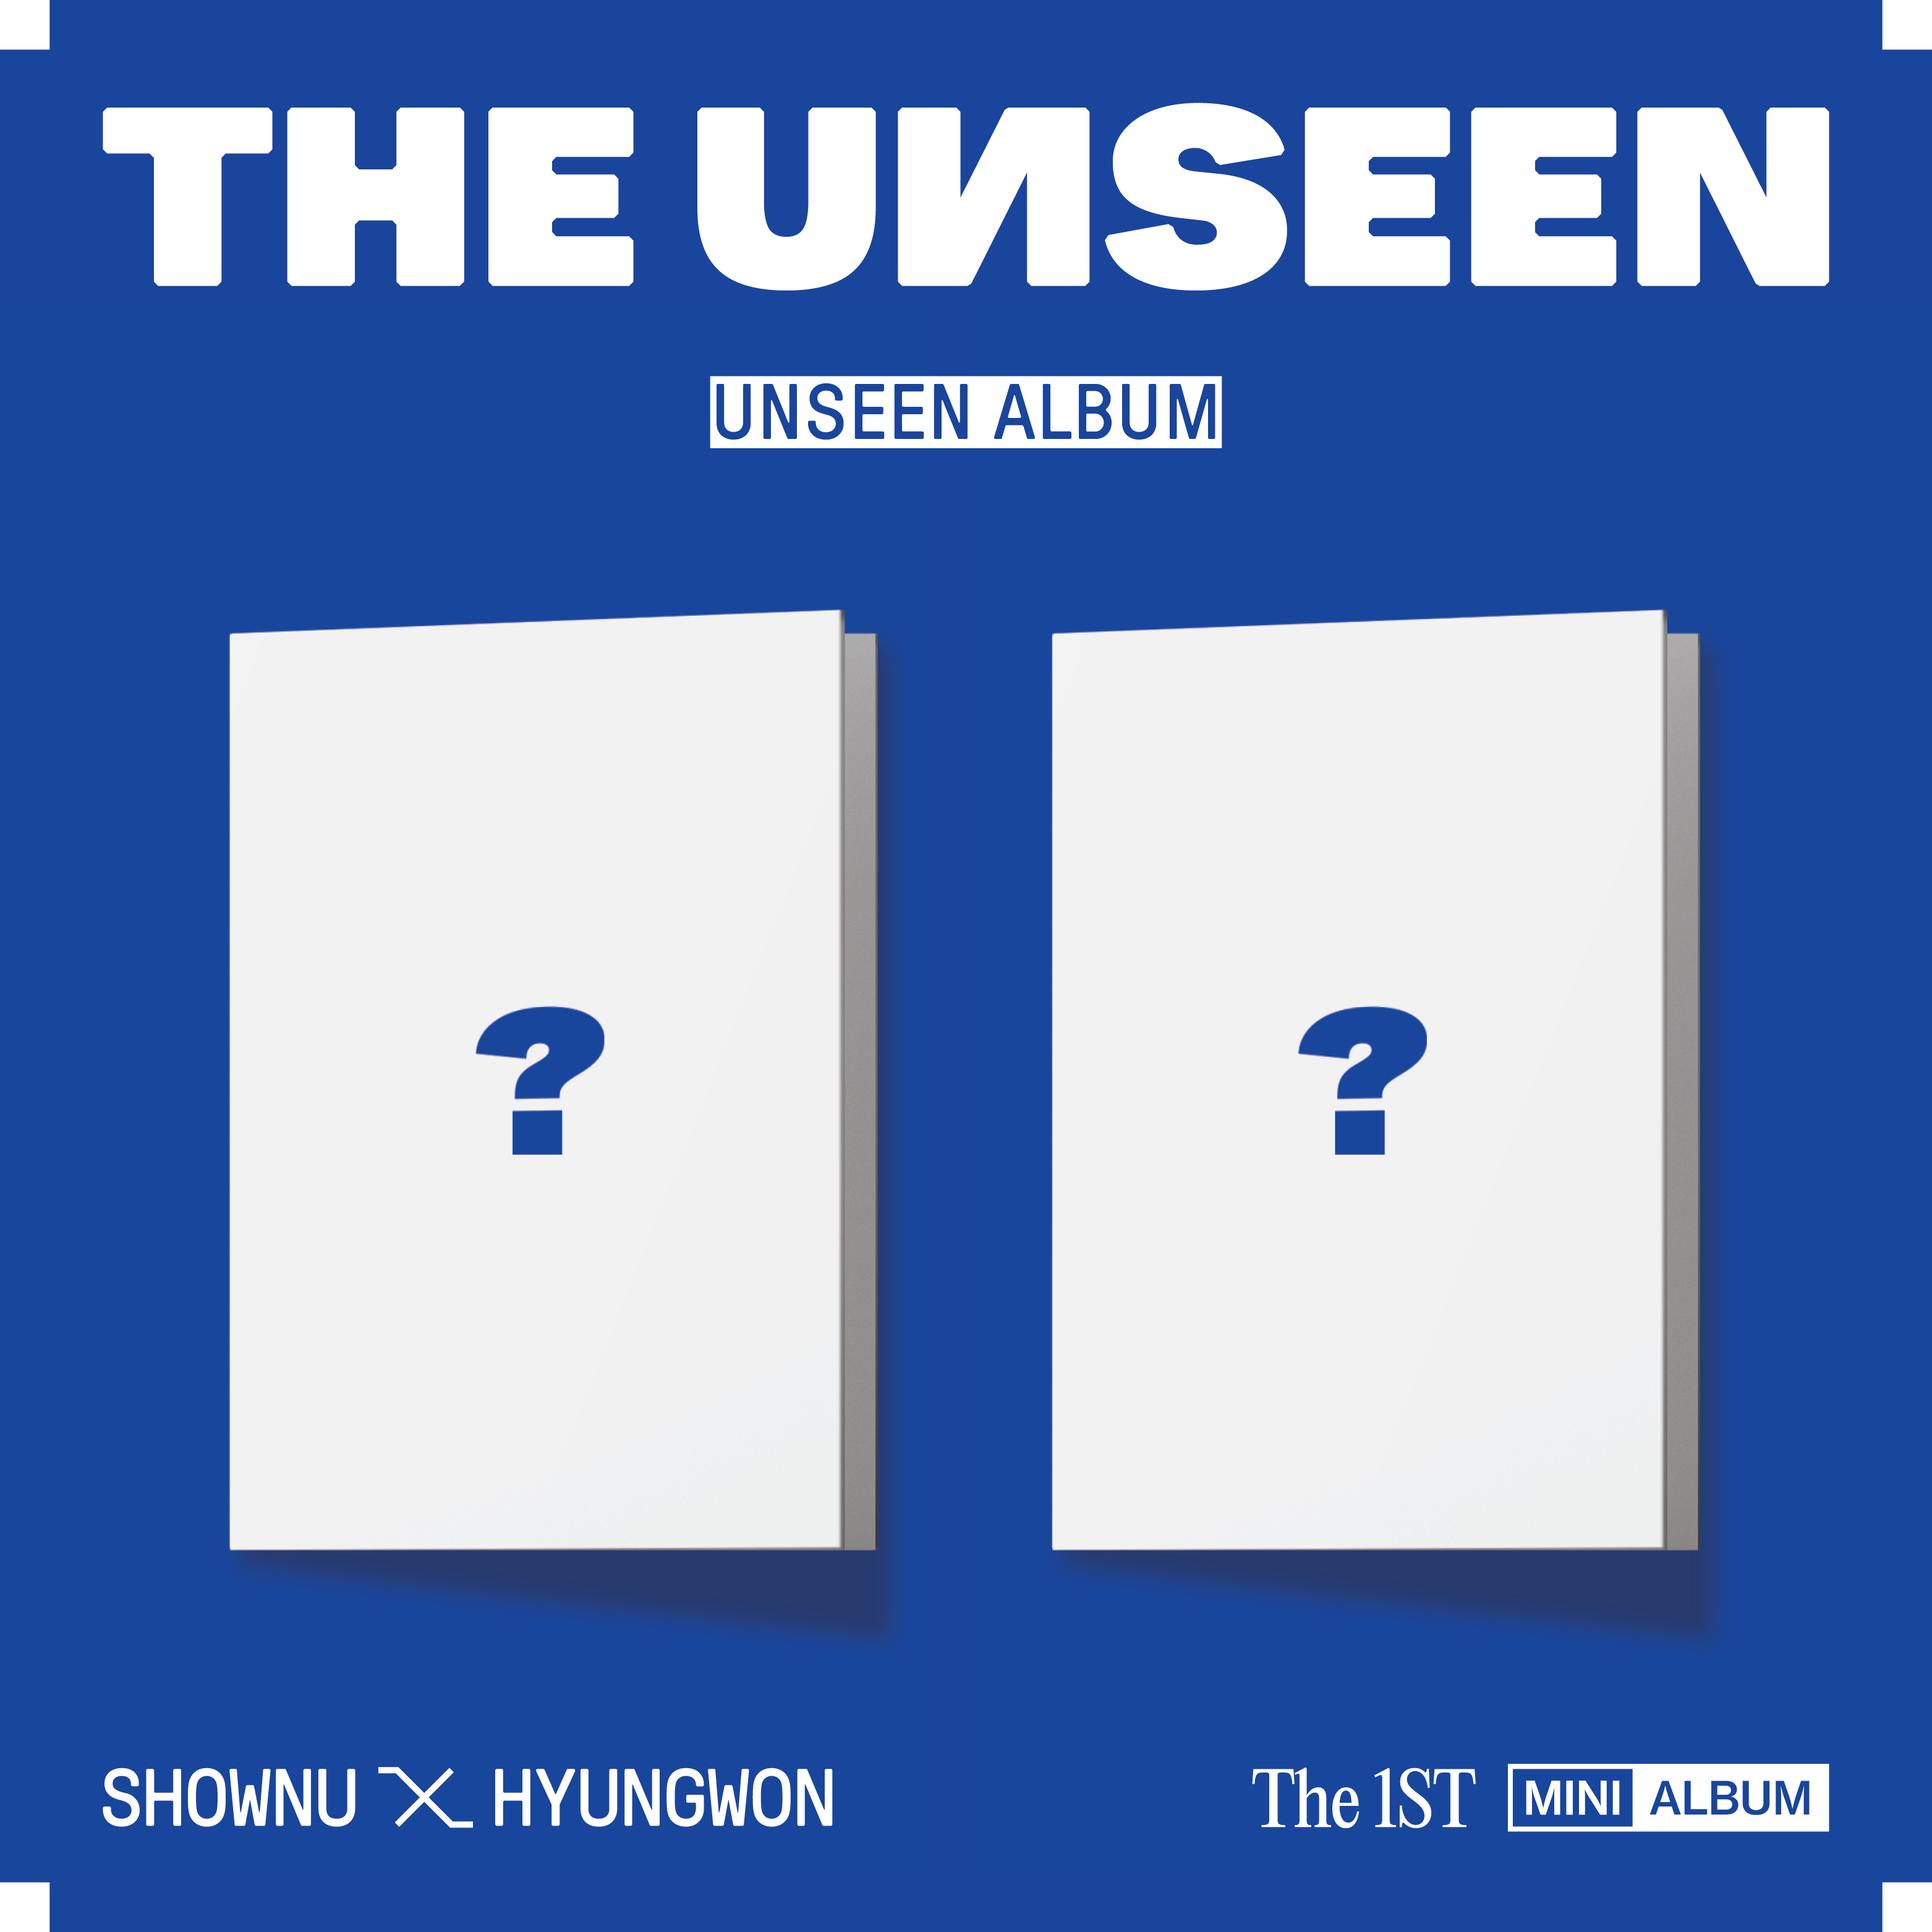 SHOWNU X HYUNGWON - The 1st Mini Album [THE UNSEEN] (UNSEEN ALBUM) (UNSEEN Ver.) (Limited Edition)